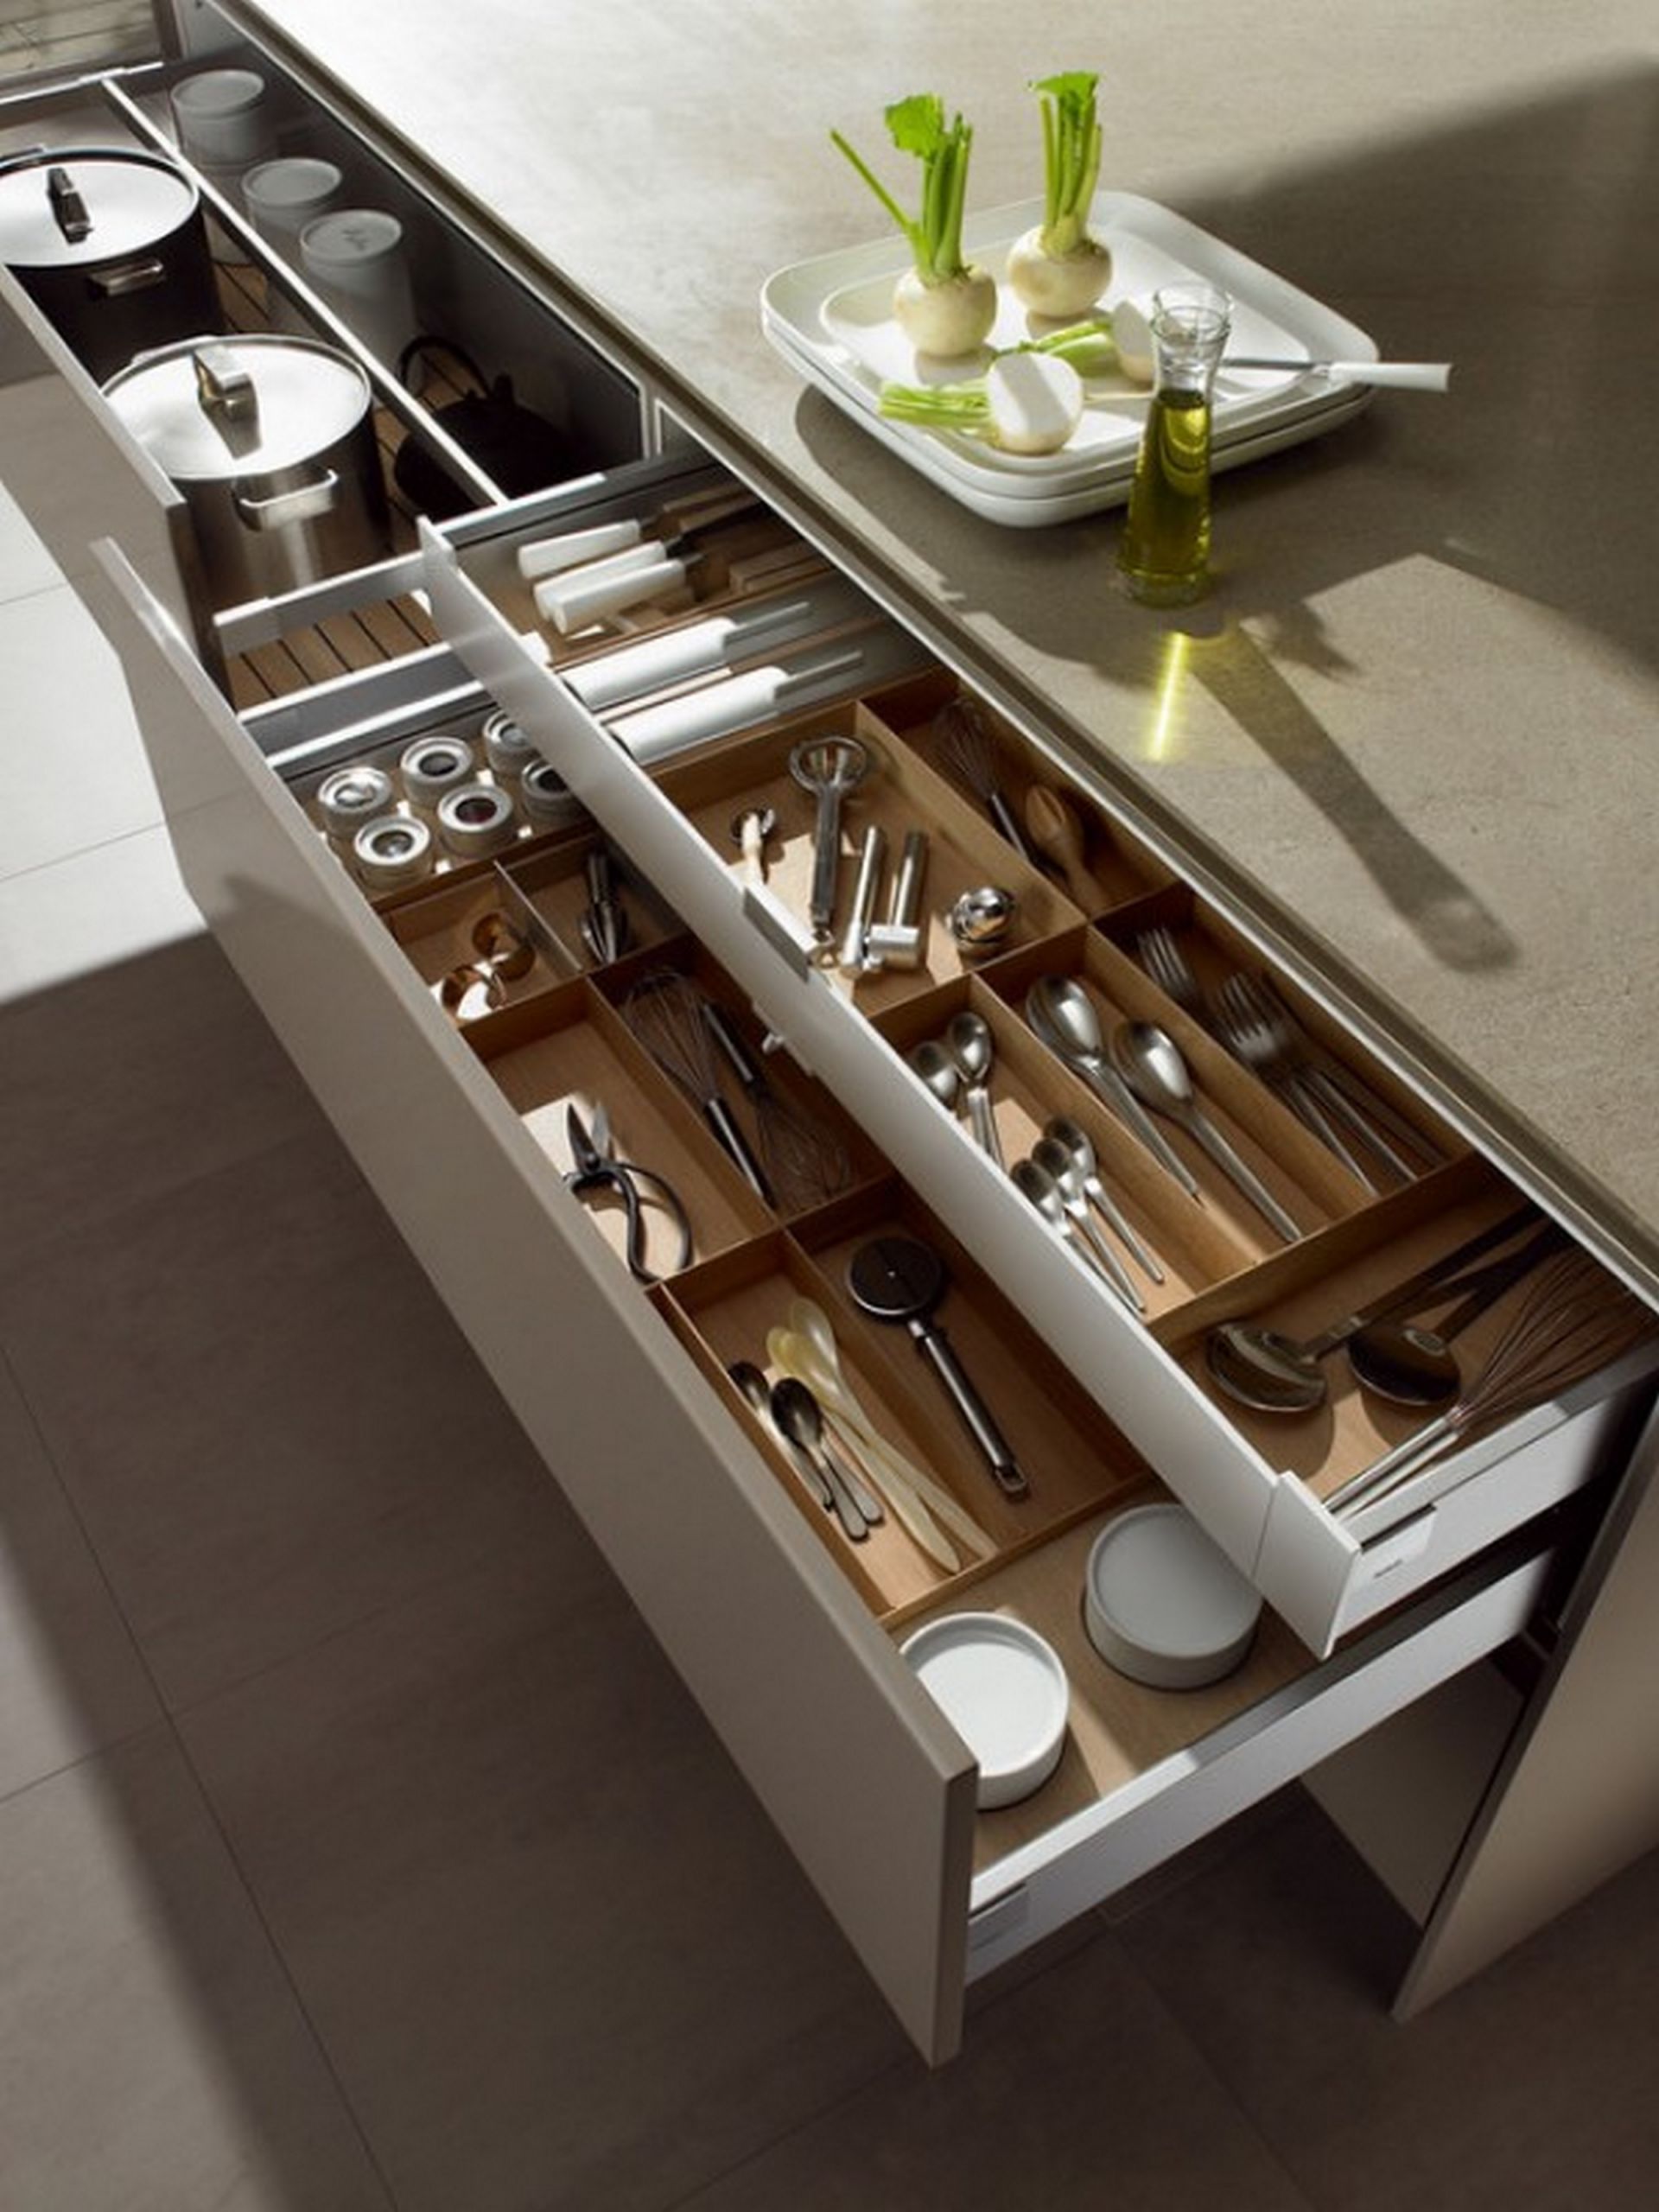 Kitchen Storage Drawer
 Tips for Perfectly Organized Kitchen Drawers